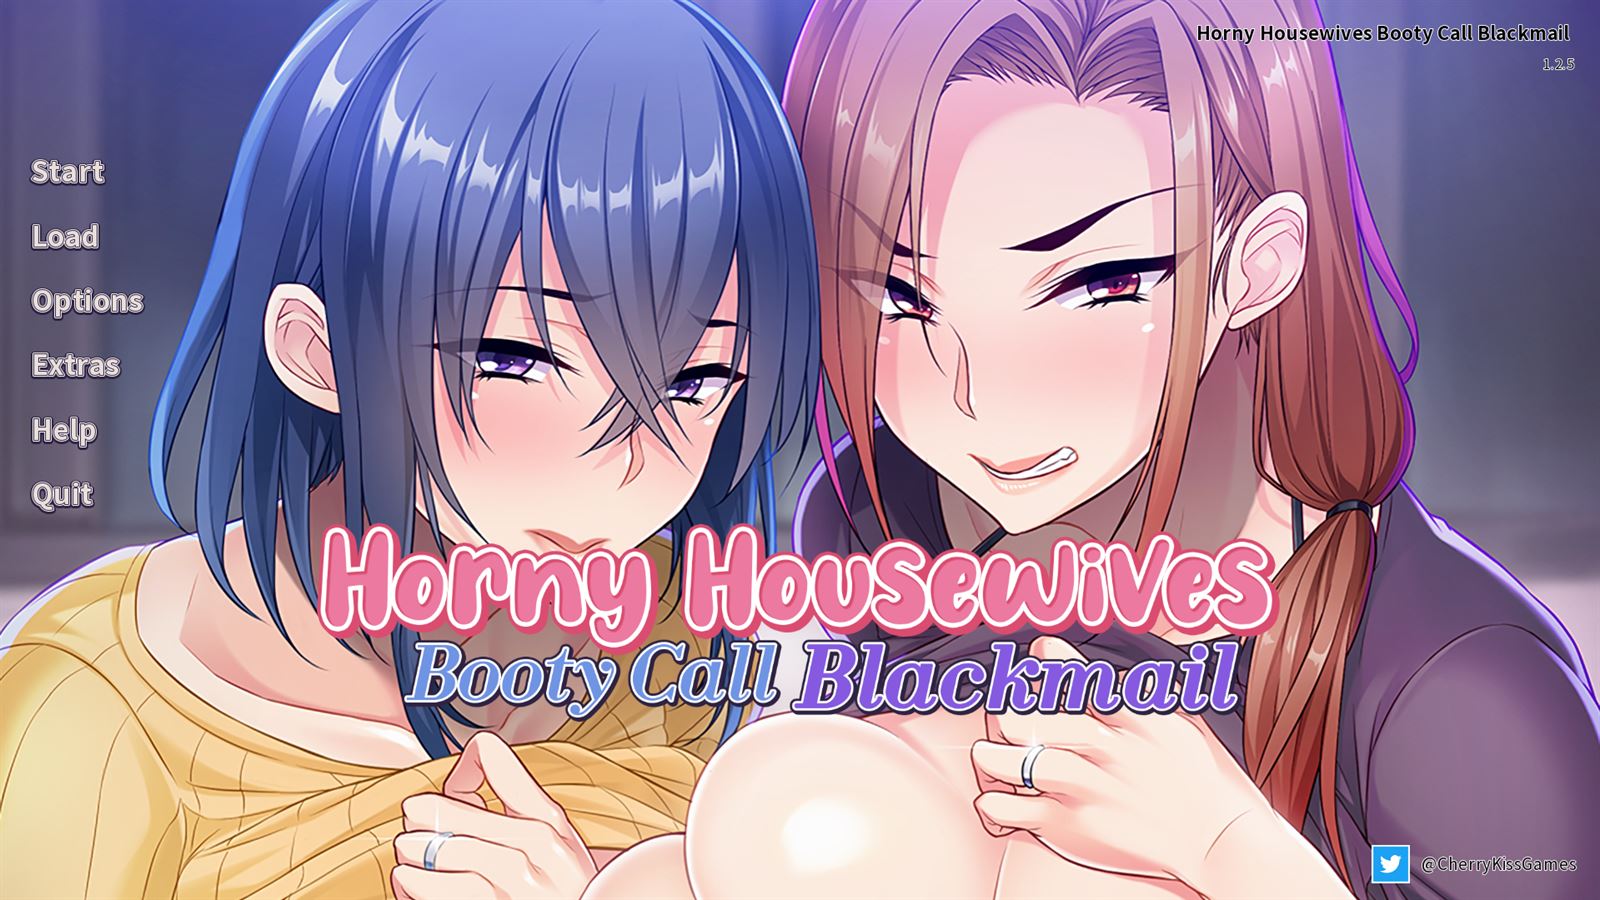 Blackmail Xxx Cartoon - Horny Housewives Booty Call Blackmail Ren'py Porn Sex Game v.Final Download  for Windows